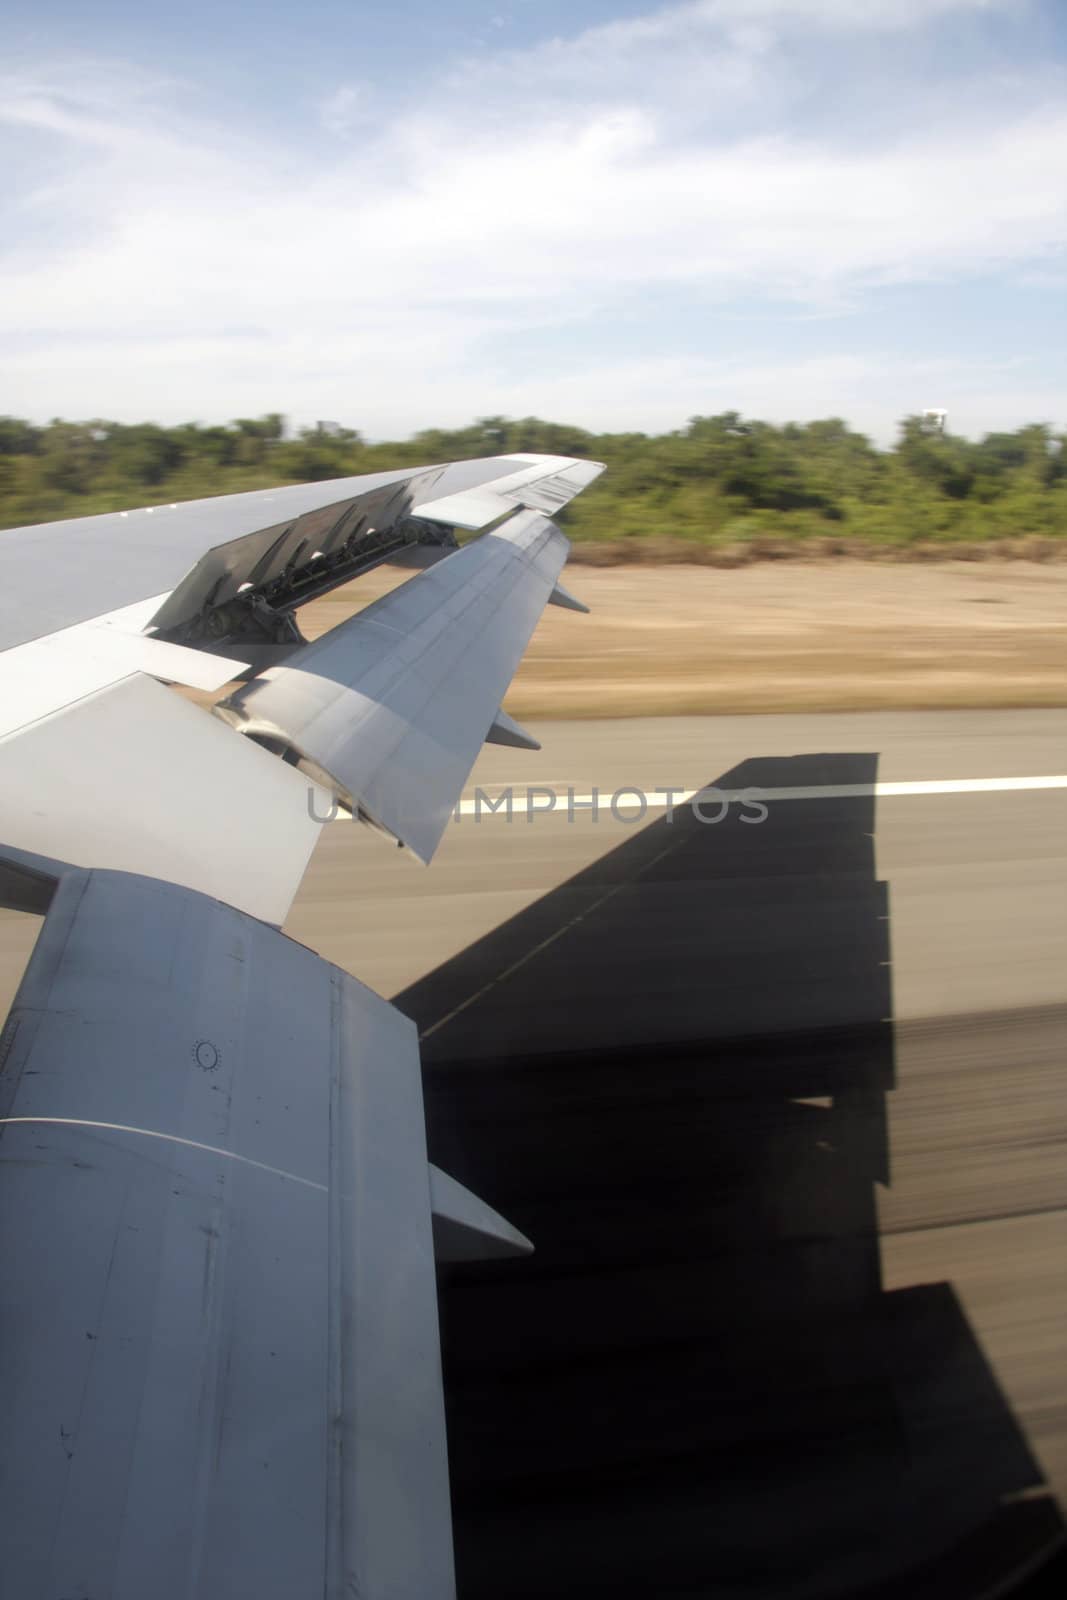 An aircraft wing at the moment of landing